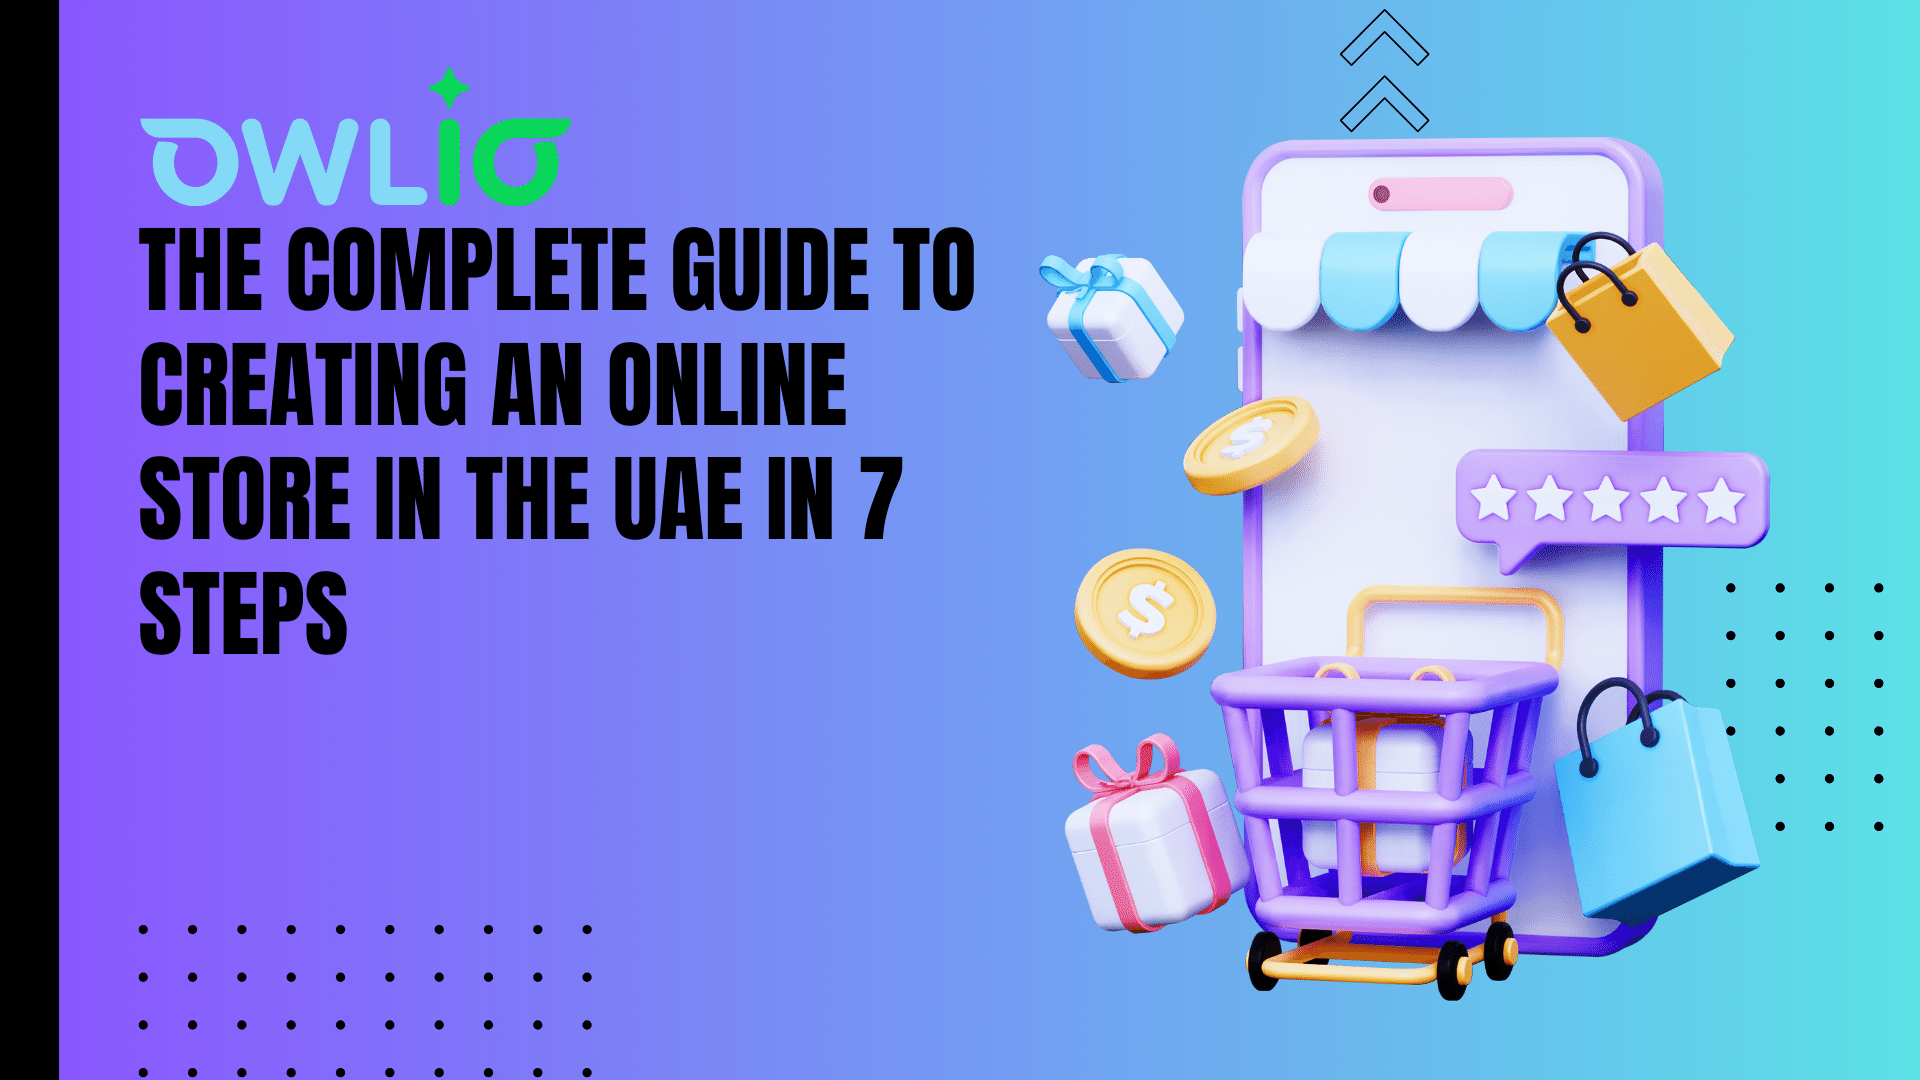 The Complete Guide to Creating an Online Store in the UAE in 7 Steps